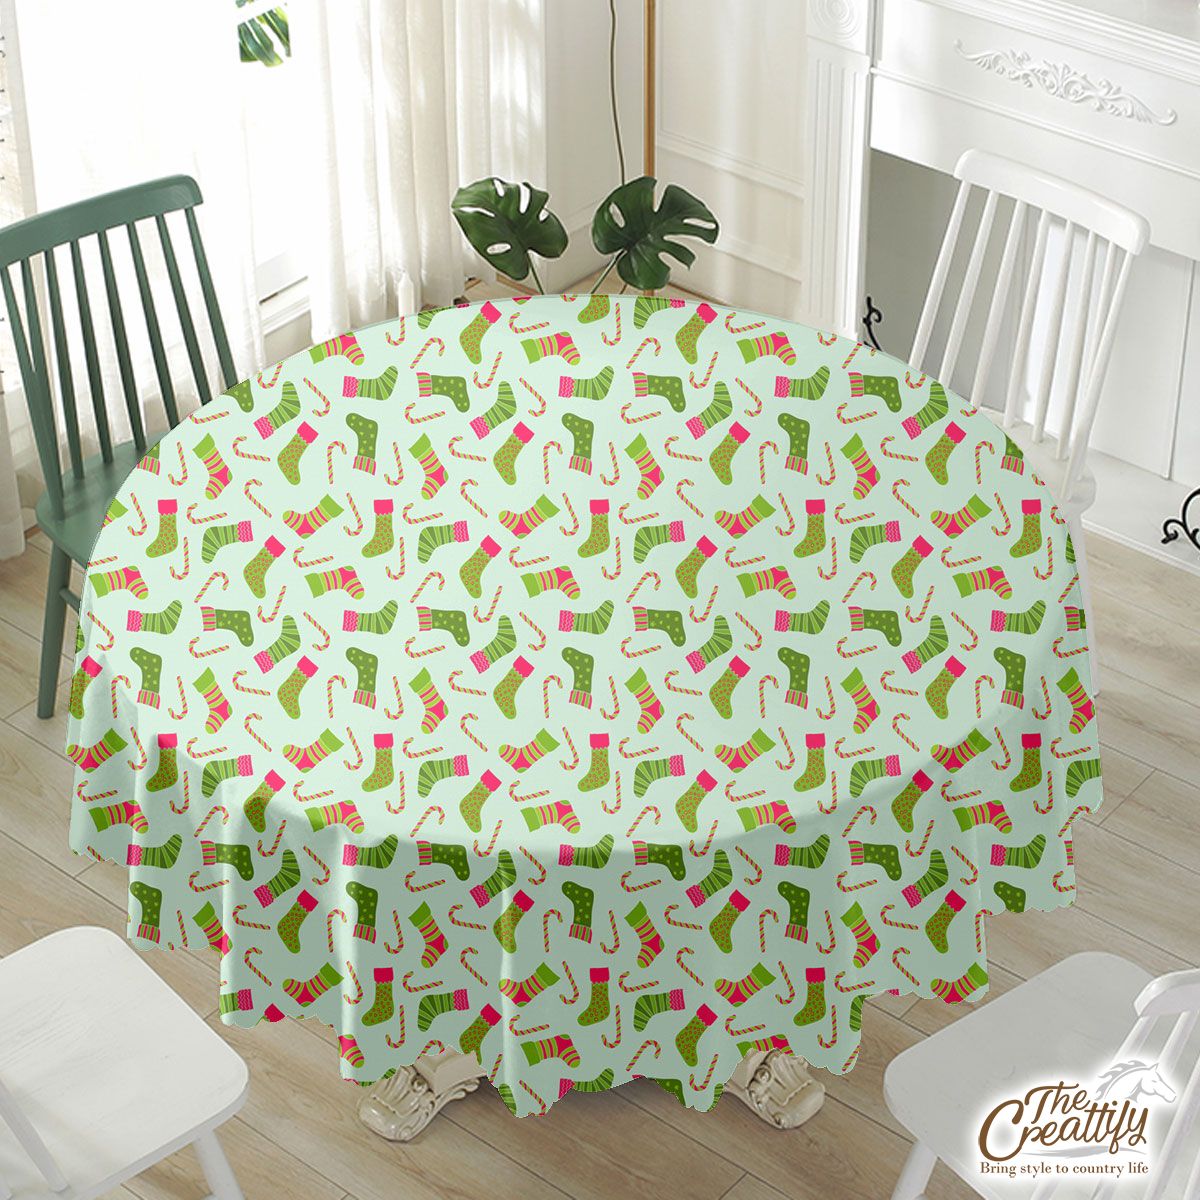 Christmas Socks, Colorful Socks And Candy Canes Waterproof Tablecloth